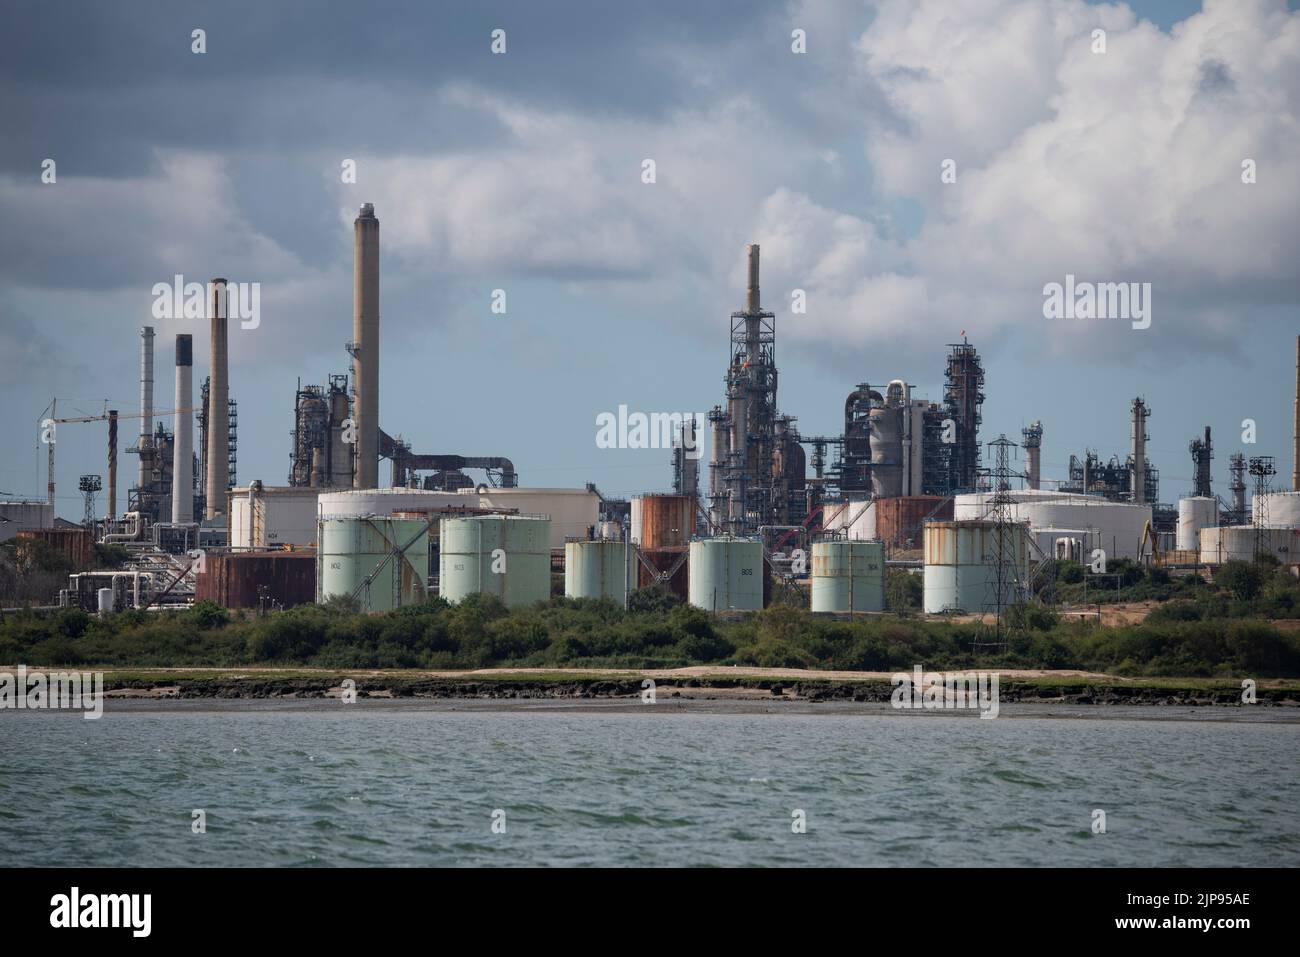 The huge oil refining and petroleum storage complex at Fawley sits close to Southampton Water on the South coast of England Stock Photo